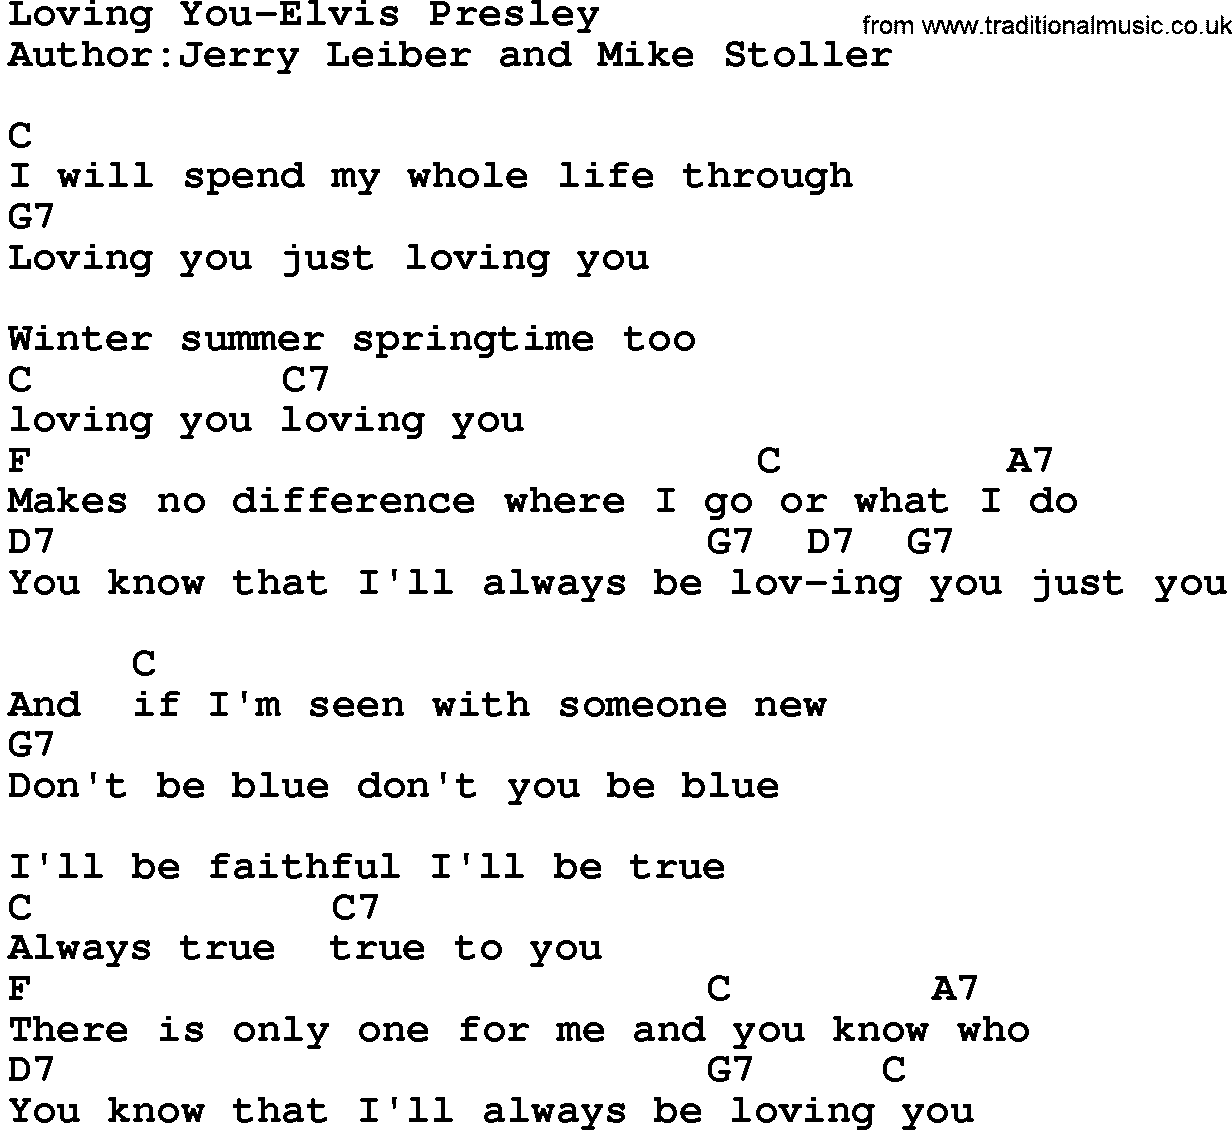 Country music song: Loving You-Elvis Presley lyrics and chords